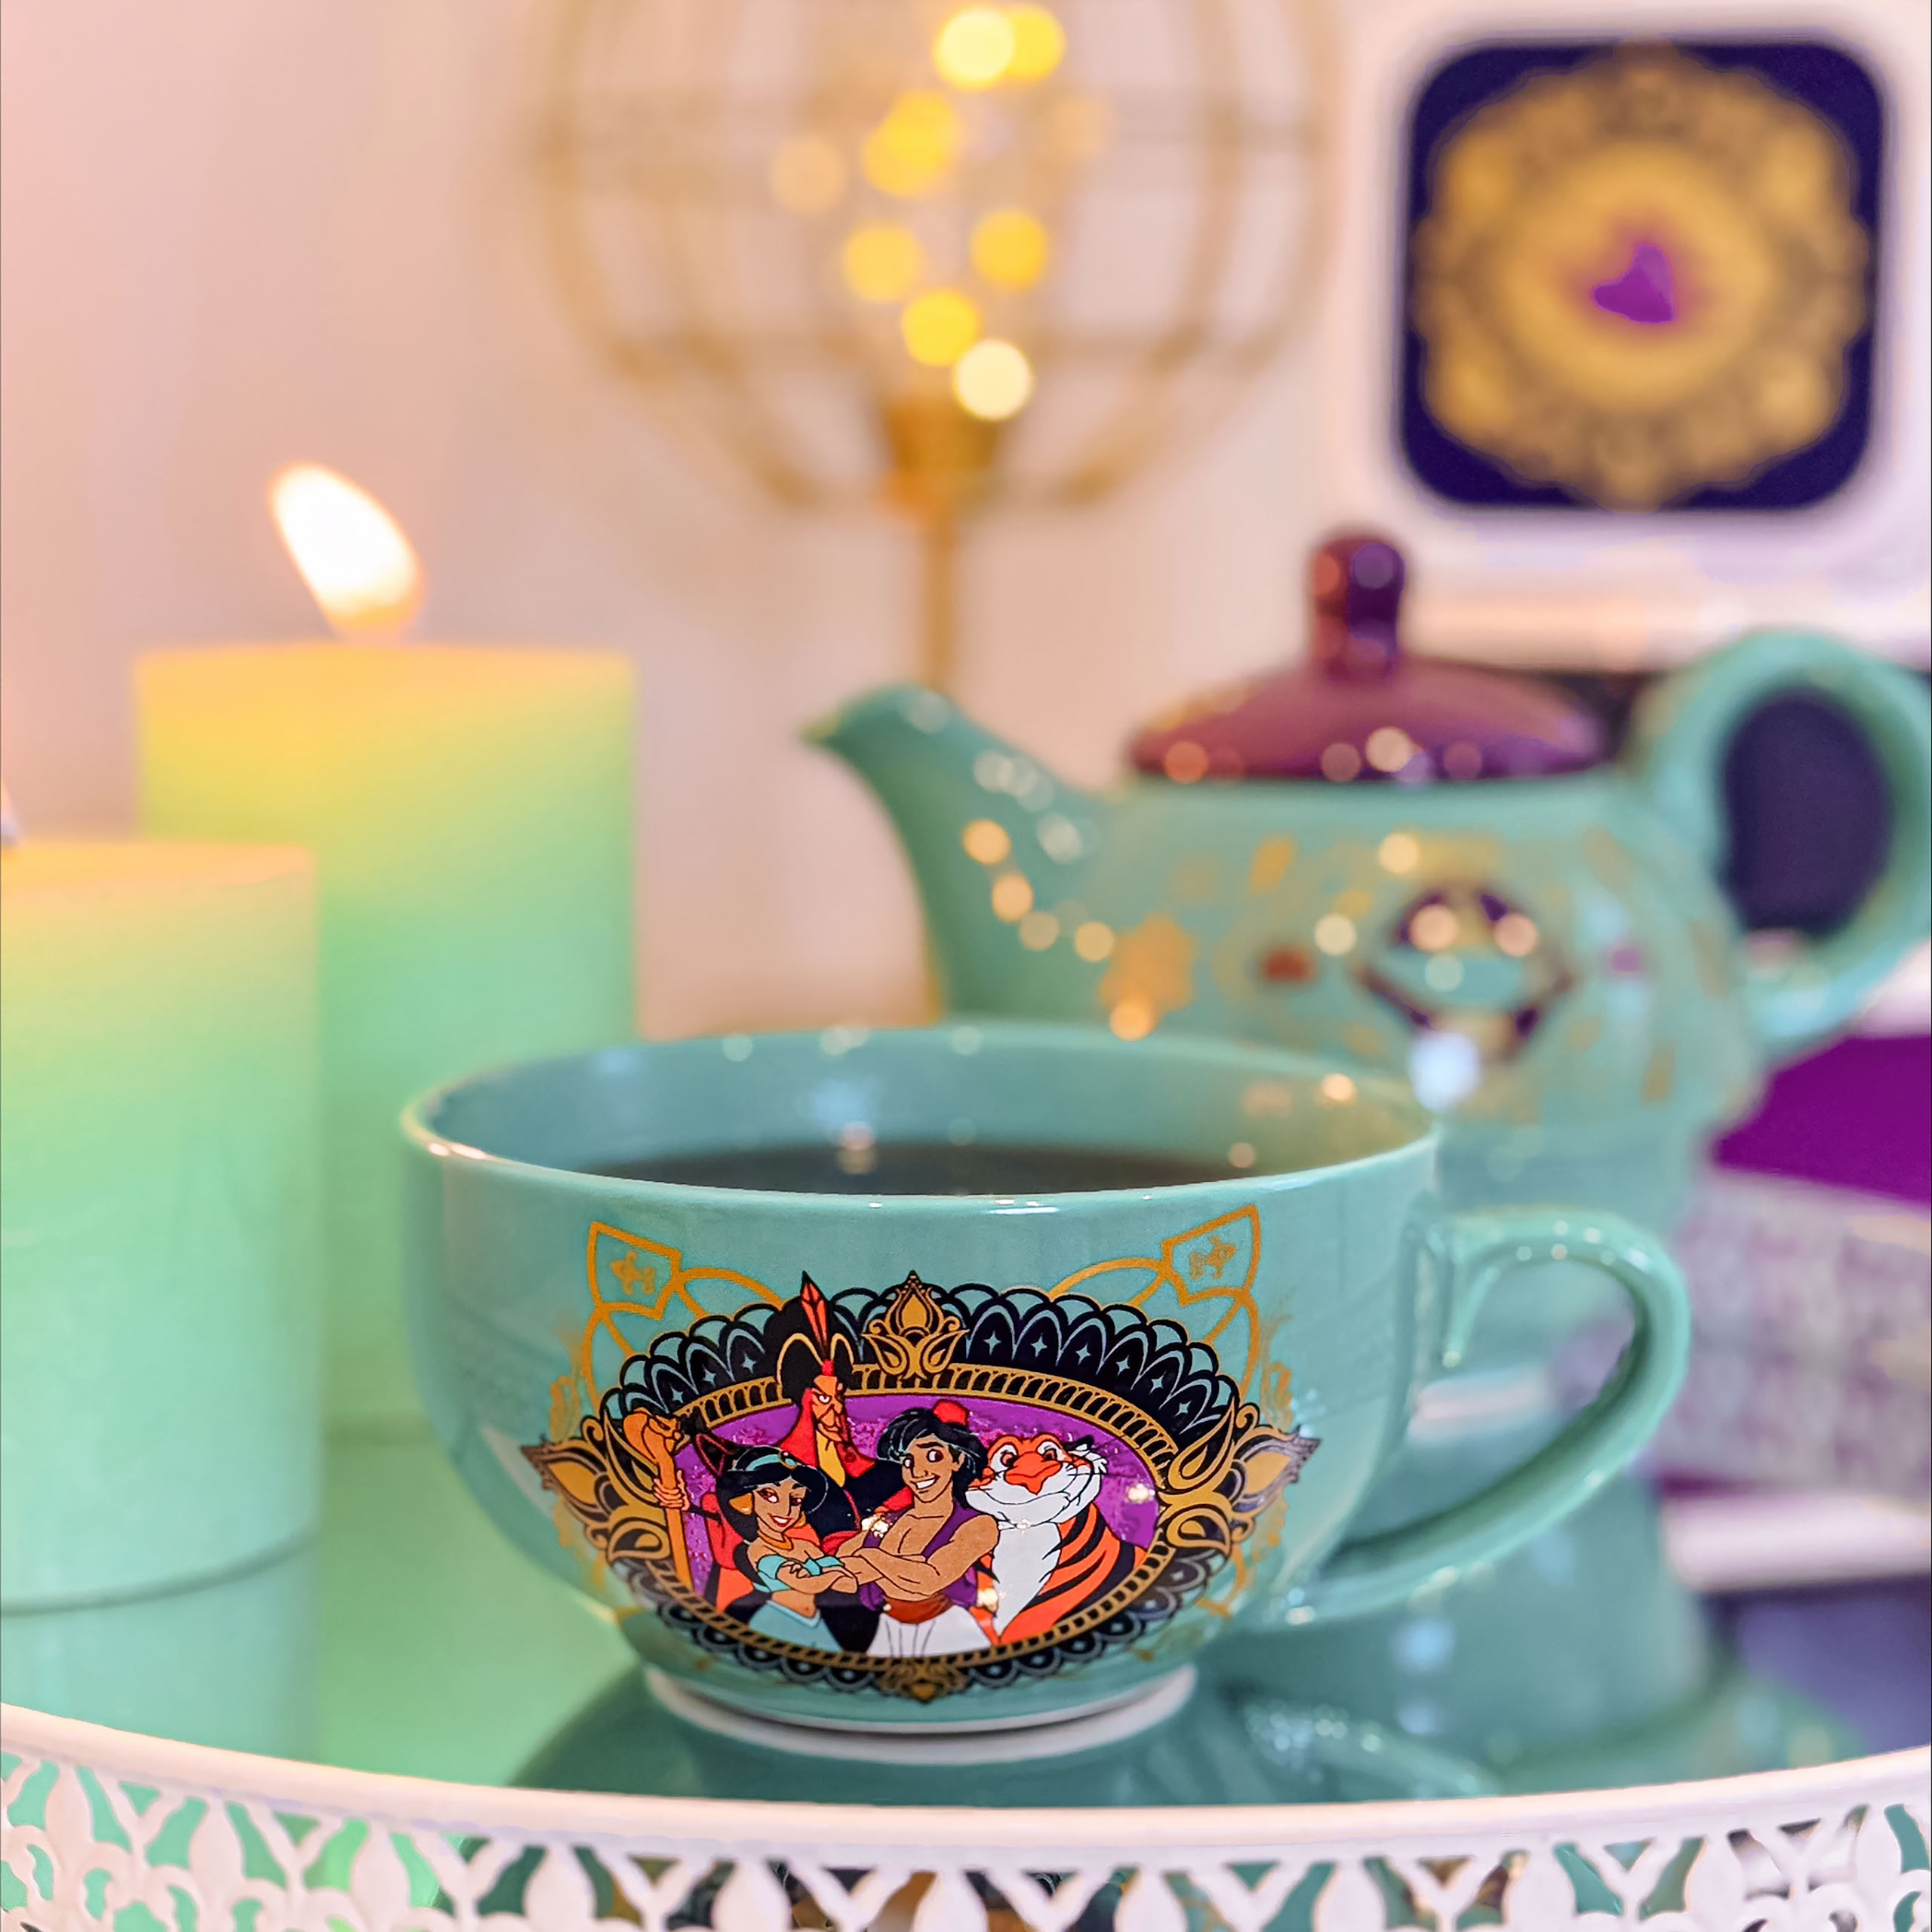 Aladdin - Always Wishing for Adventure Tea Pot with Cup